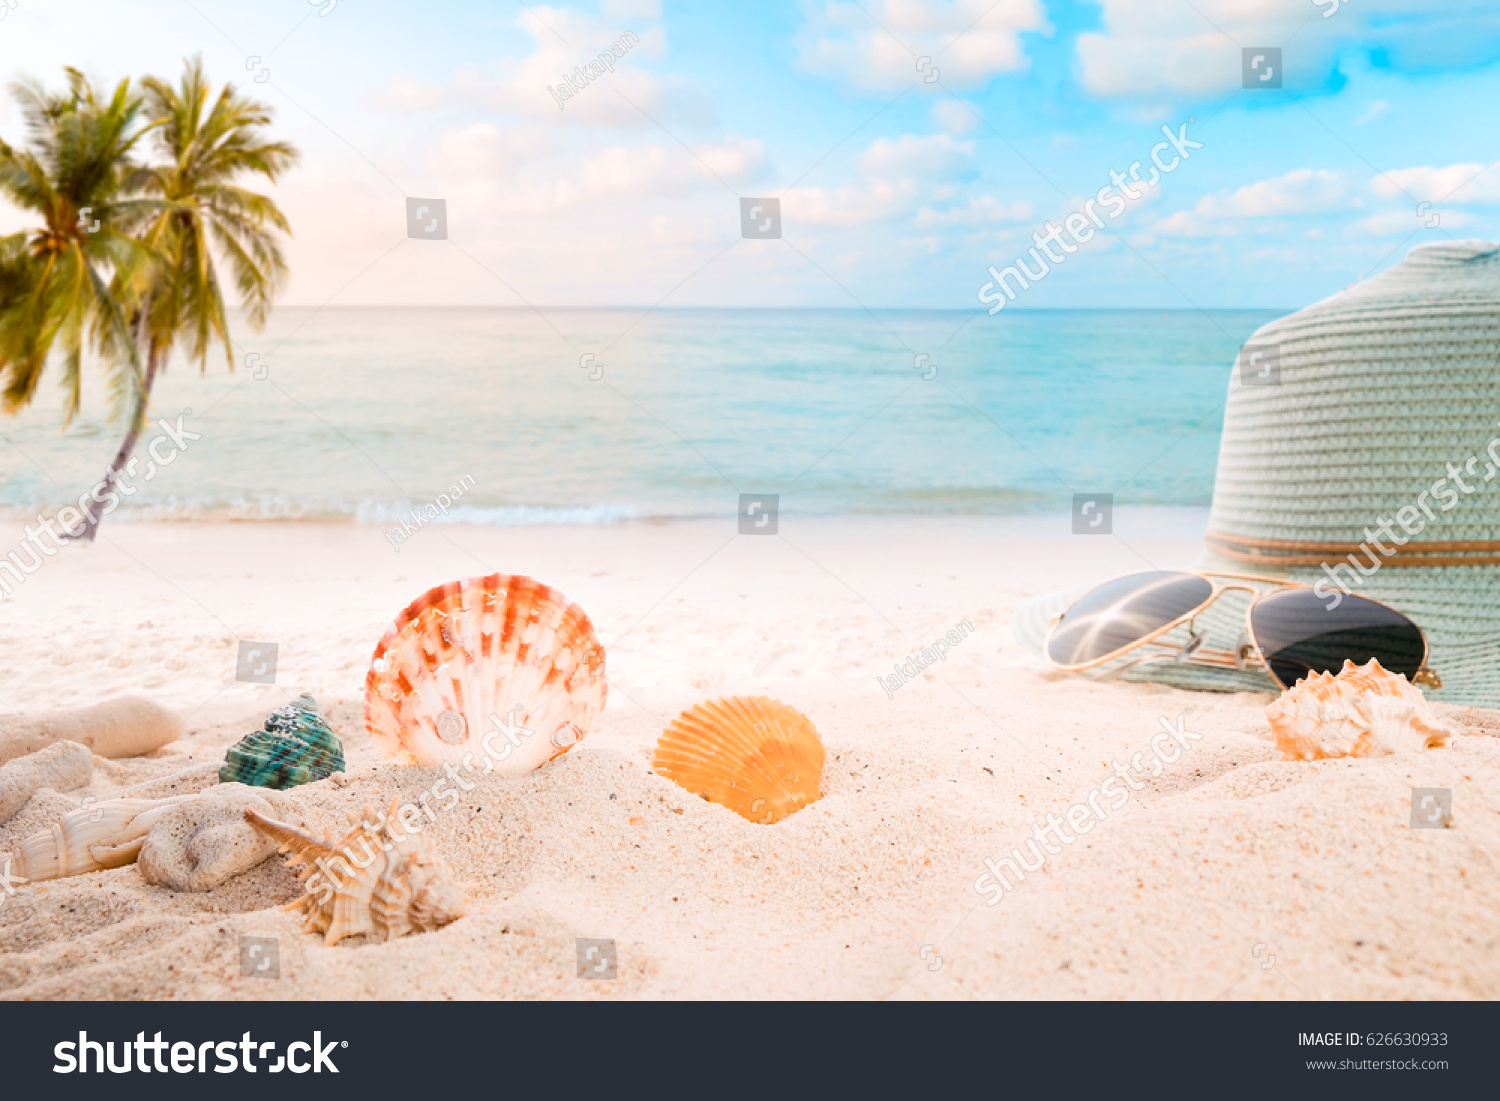 Summer accessories on sandy in seaside summer beach with starfish, shells, coral on sandbar and blur sea background. Concept of recreation in summertime on tropical beach.  vintage color tone styles. #626630933